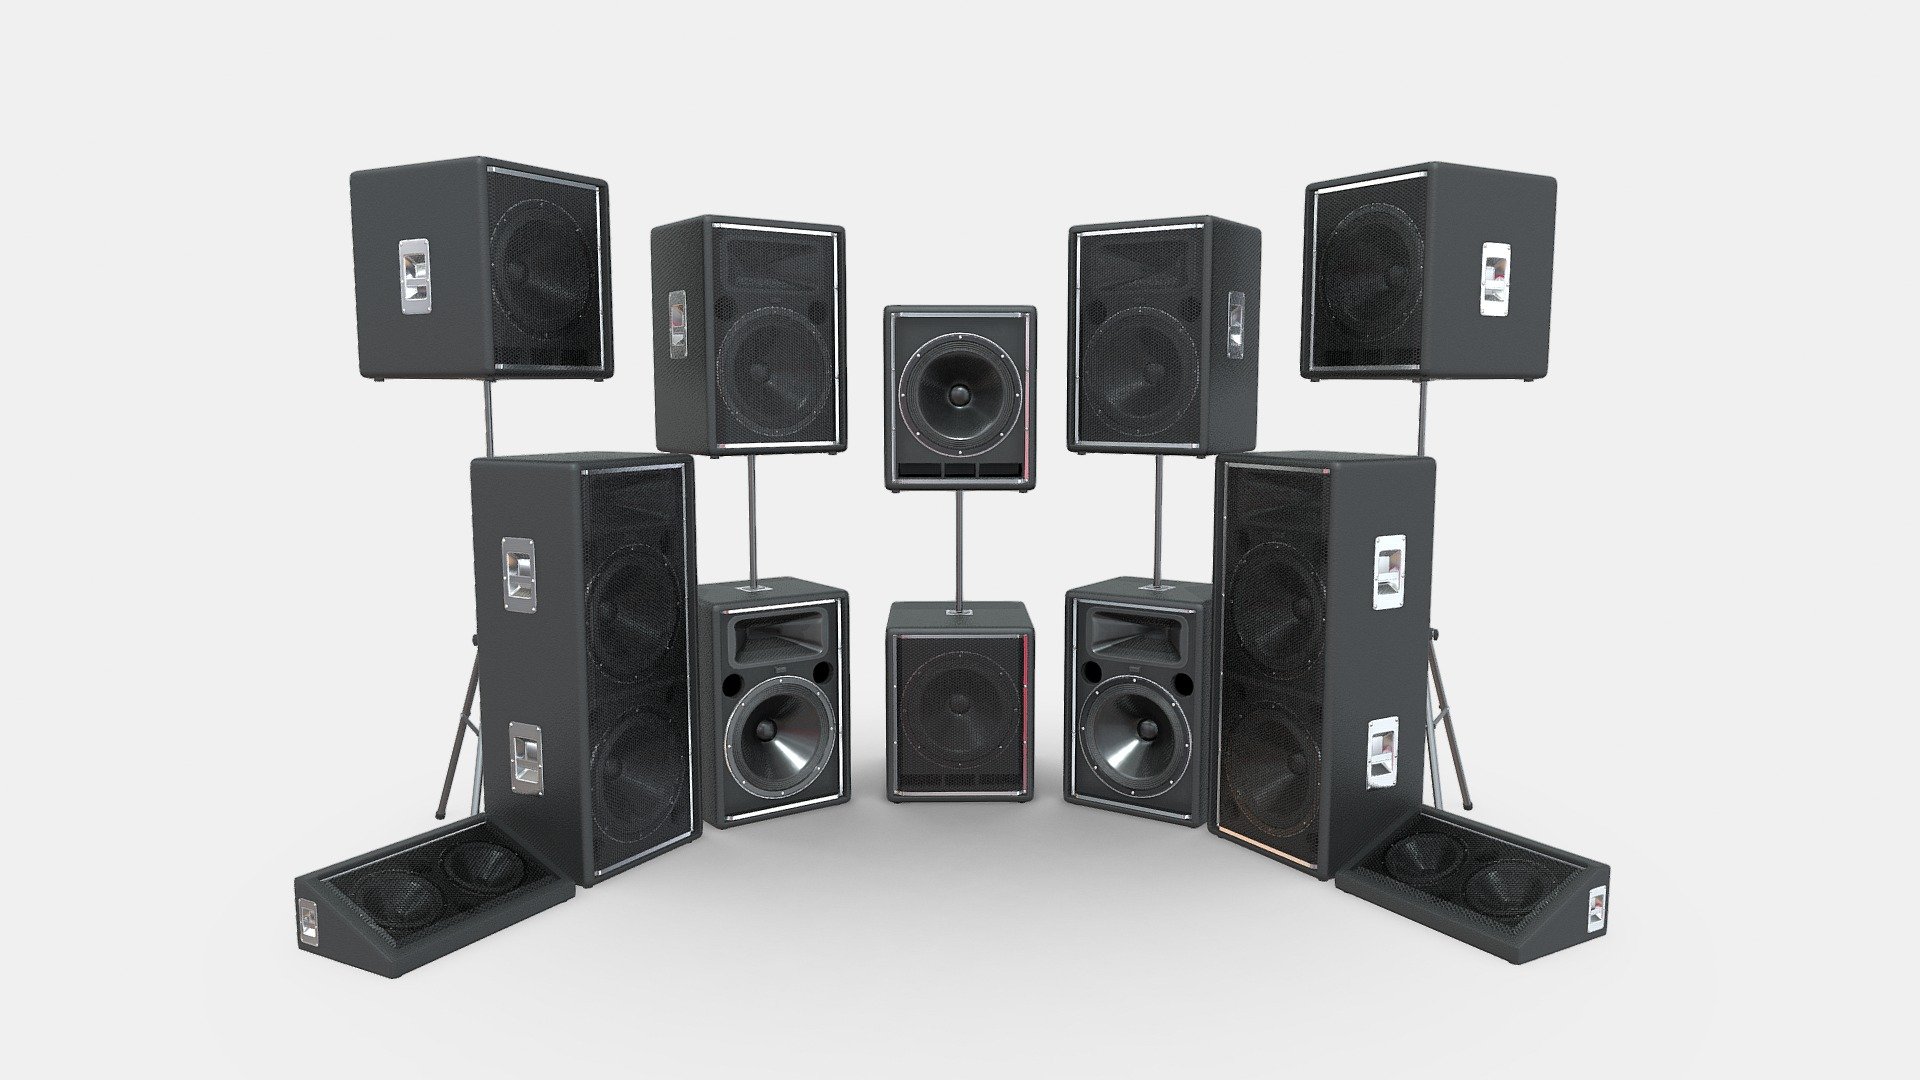 Musical speakers - a device for playing sound.

Includes a set of four speakers, stand and clasps.

Bass Music Column

• Polys: 6219
• Verts: 6237

 Middle Music Column 

• Polys: 6548
• Verts: 6254

Double Middle Music Column 

• Polys: 6548
• Verts: 6254

Floor Column 

• Polys: 8385
• Verts: 8312

Stand 

• Polys: 4425
• Verts: 4479

Fasteners 

• Polys: 1505
• Verts: 1578

TEXTURES

• Albedo

• Normal

• Metallic

• Roughness

• Ambient Occlusion

◼ PBR workflow ◼

4096x4096 high resolution texture sets are made according to the working process PBR 3d model